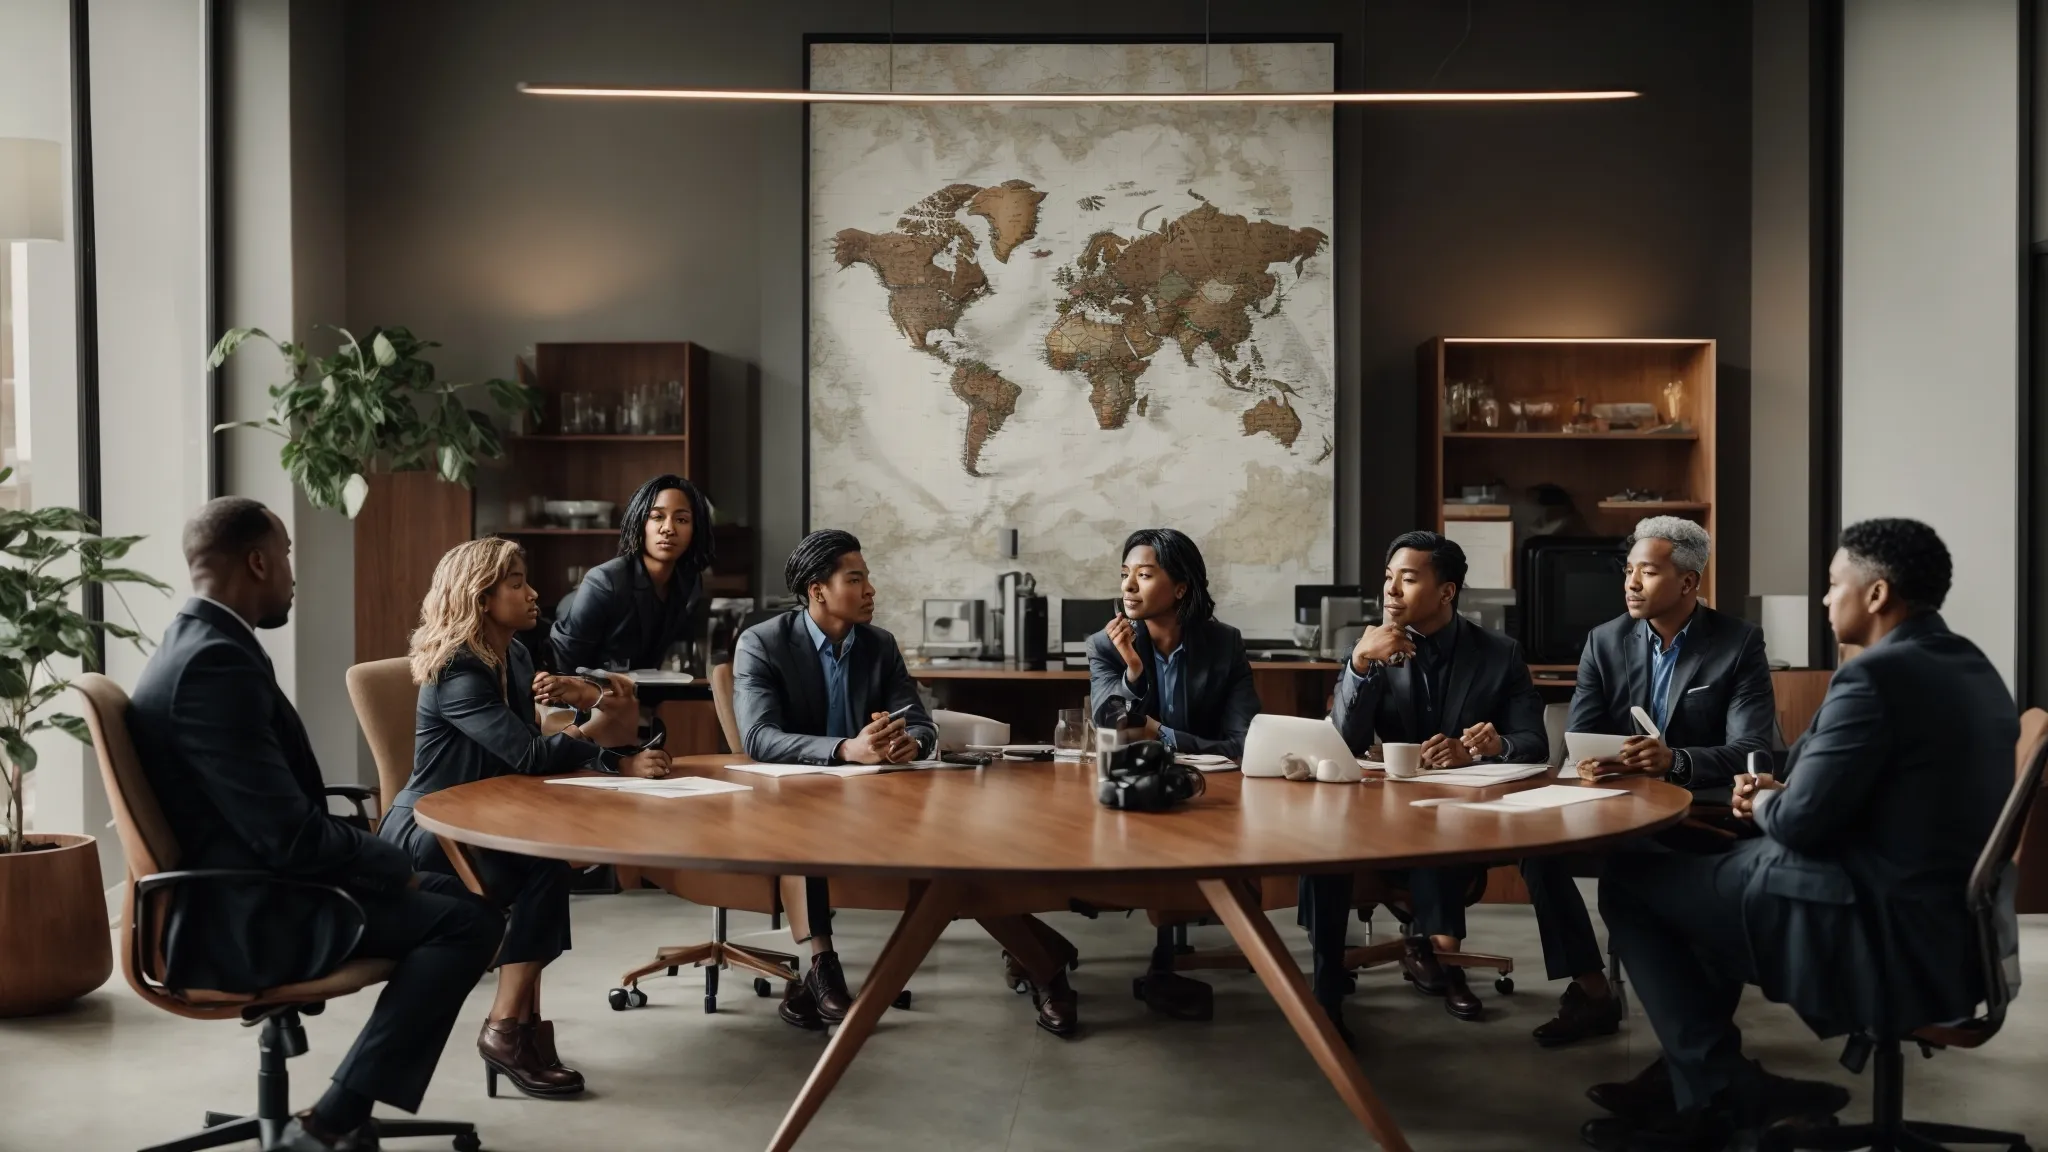 a diverse group of professionals gathers around a conference table, pointing at a world map and discussing strategic plans concerning ISDS Reform.